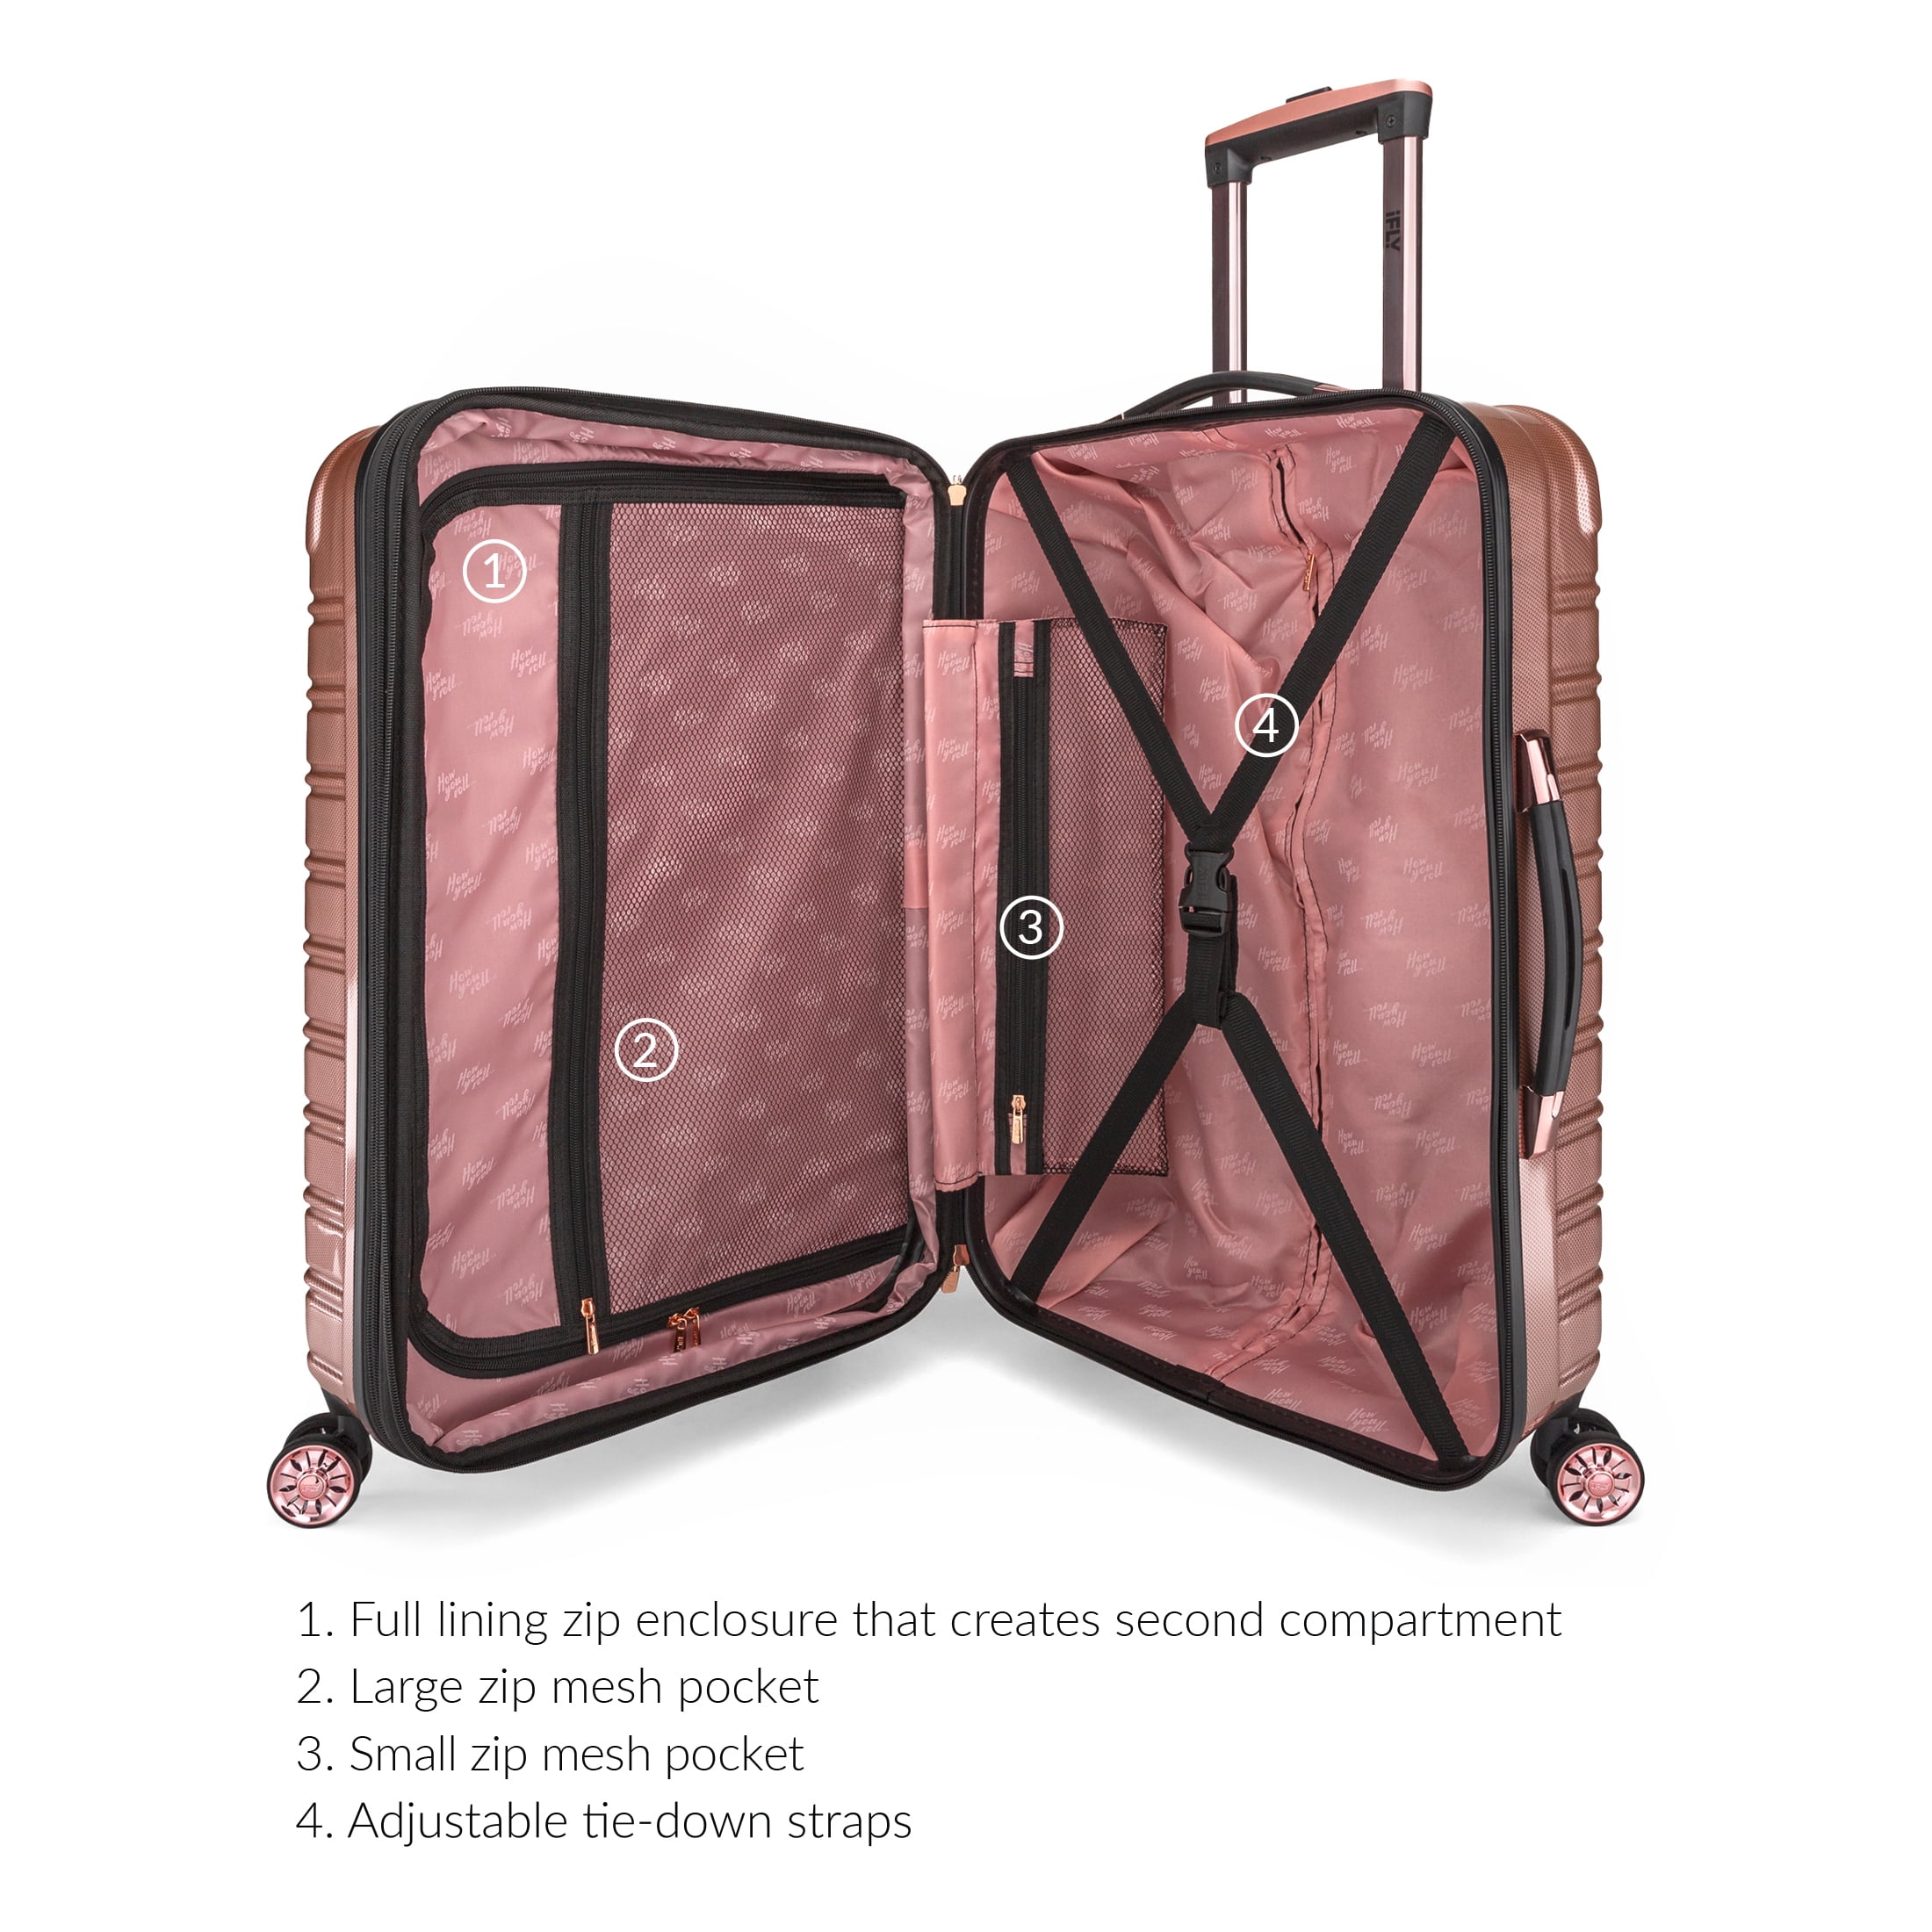 iFLY Hardside Luggage Fibertech 2 Piece Set, 20-inch Carry-on and 28-inch Checked Luggage, Rose Gold - 1